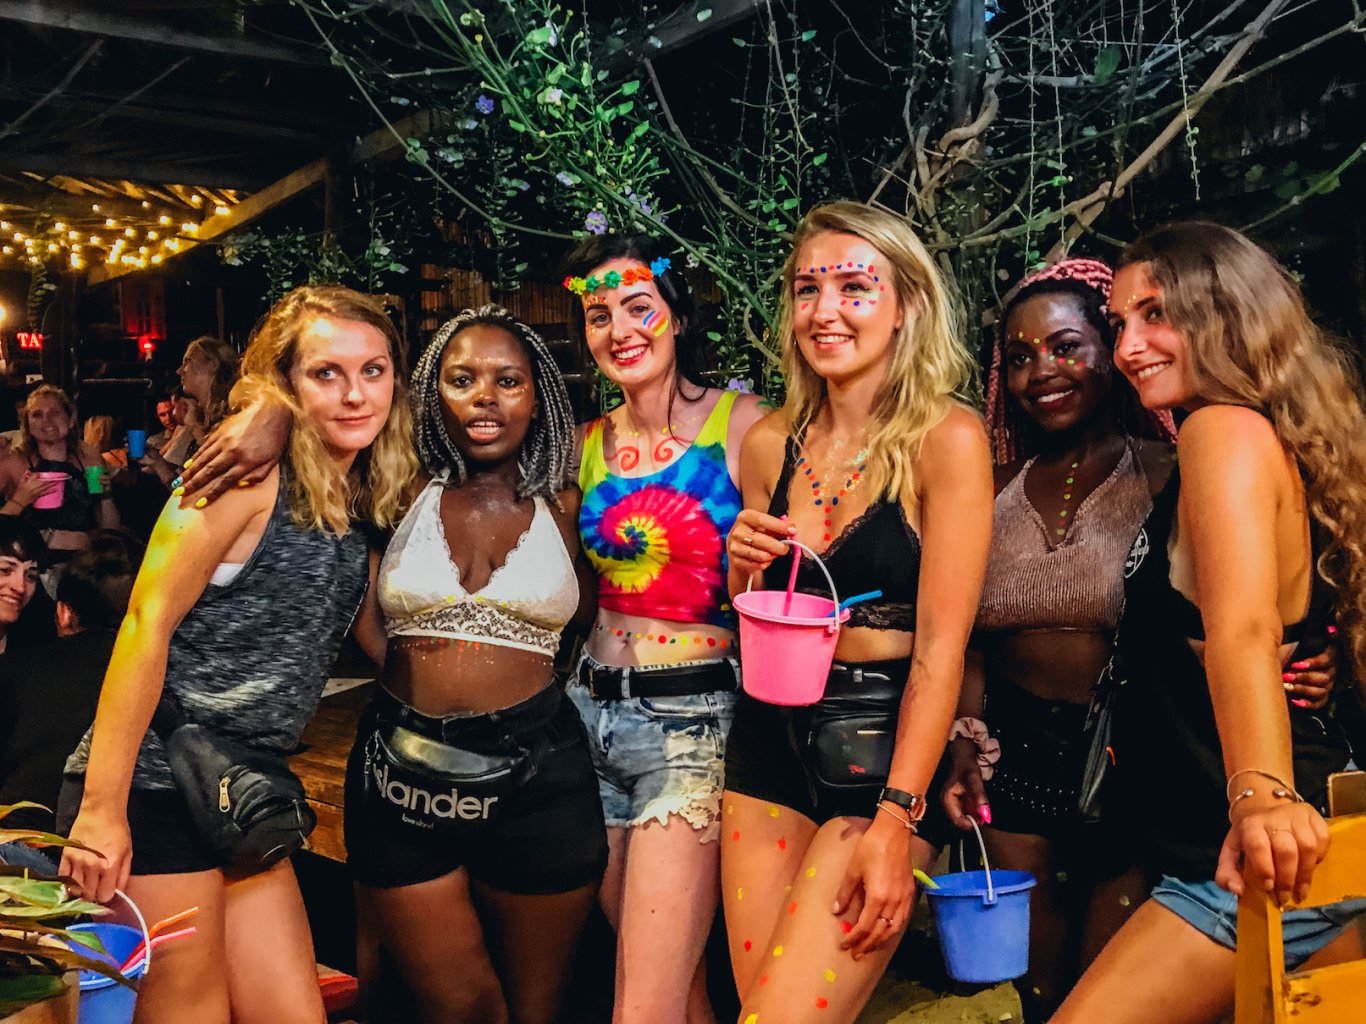 Full moon party group pictures with colourful buckets Koh Phangan Thailand 